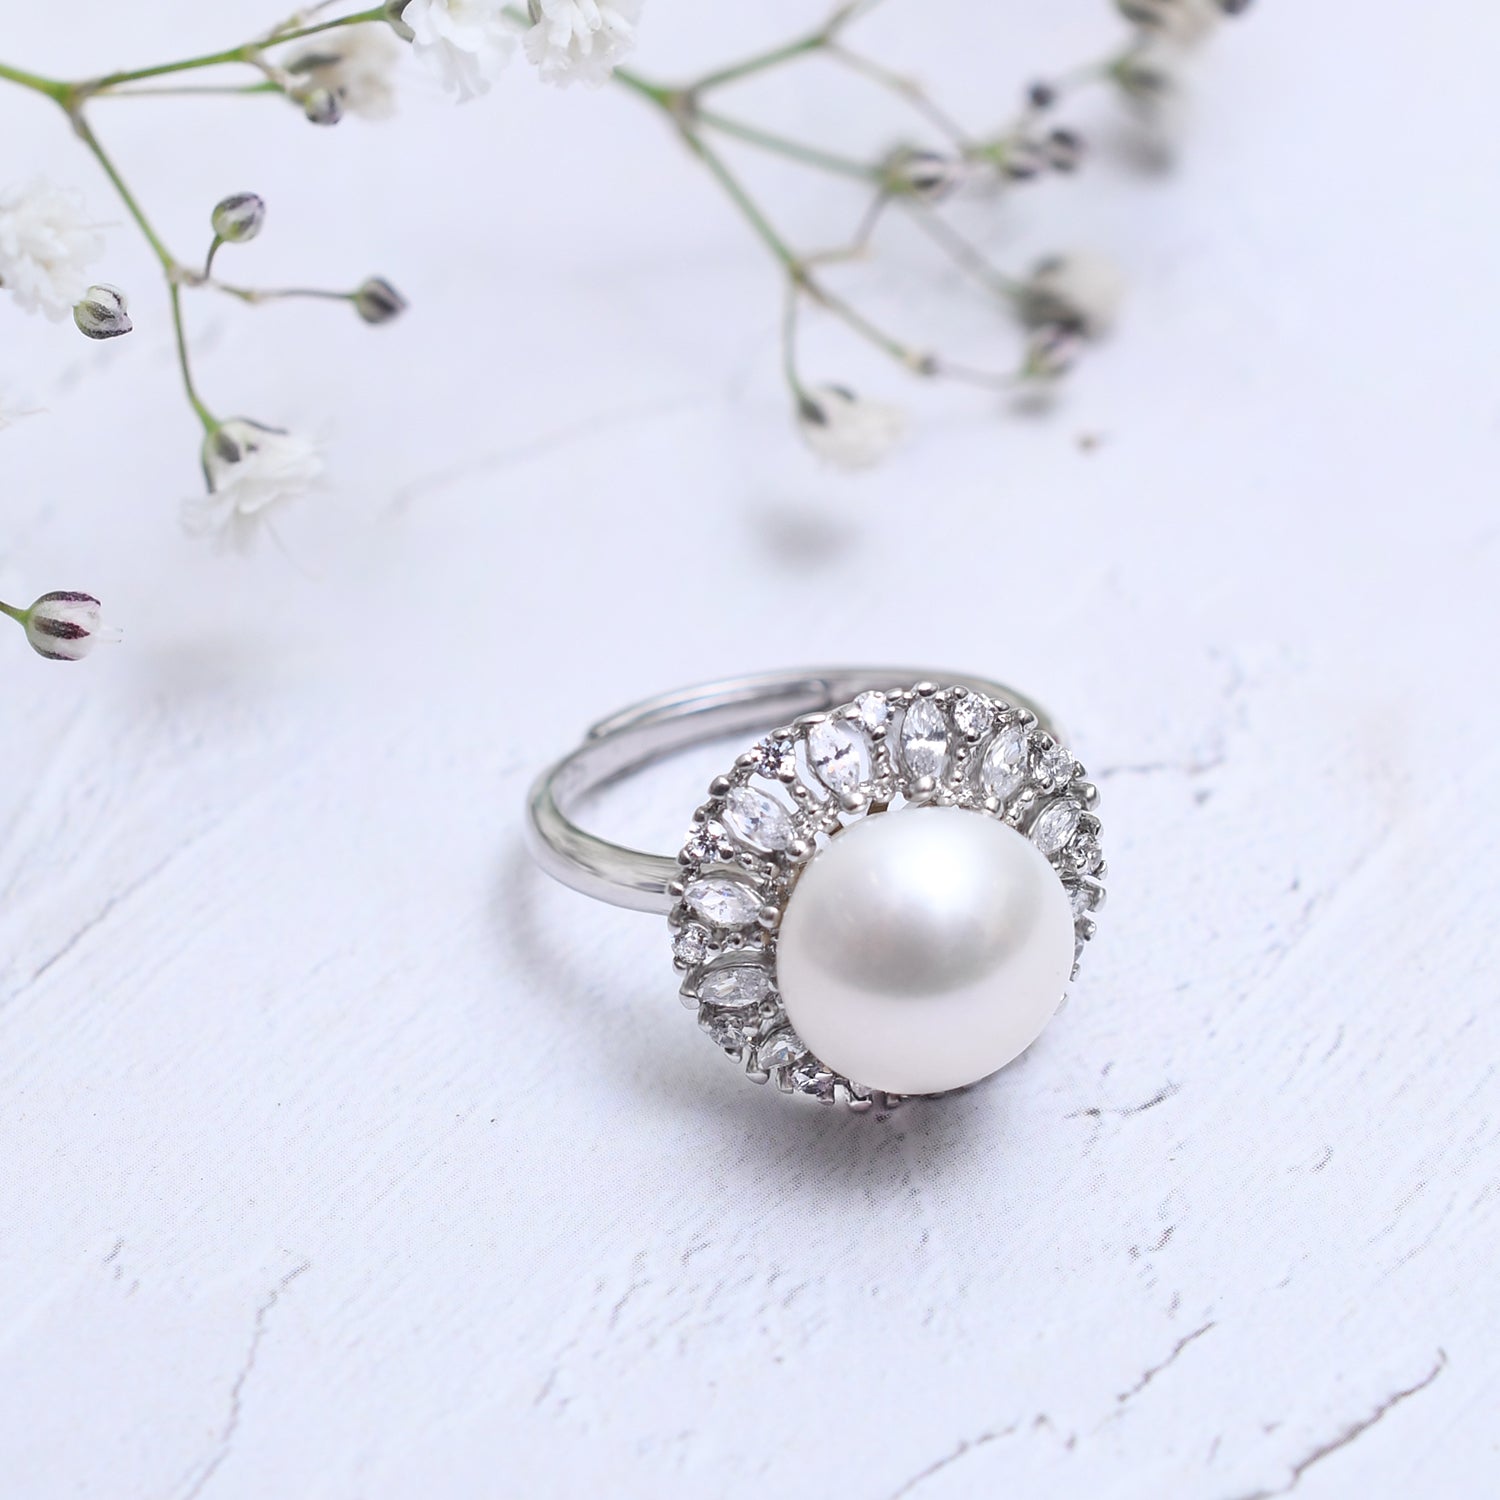 Silver Sparkling Pearl Opulence Ring